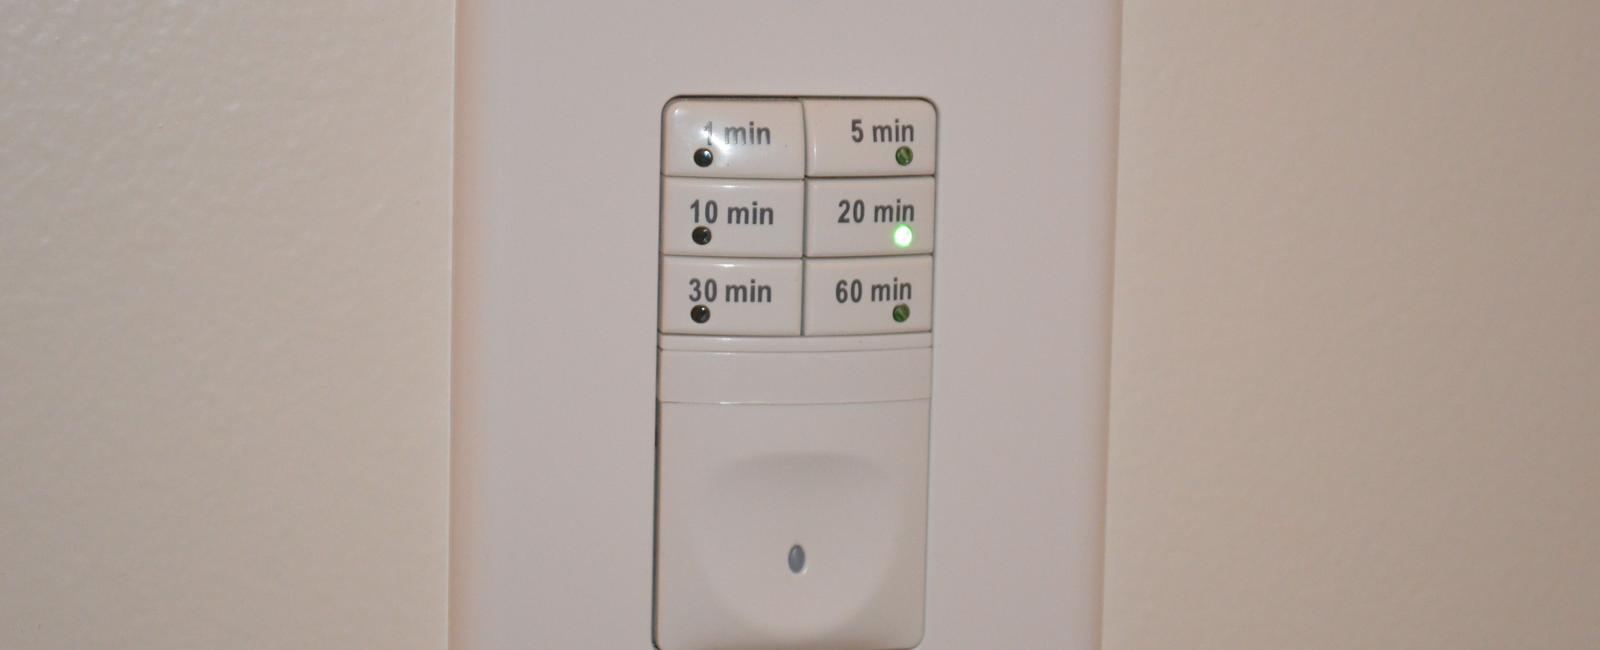 In massachusetts what is it illegal to have in the bathroom a light switch